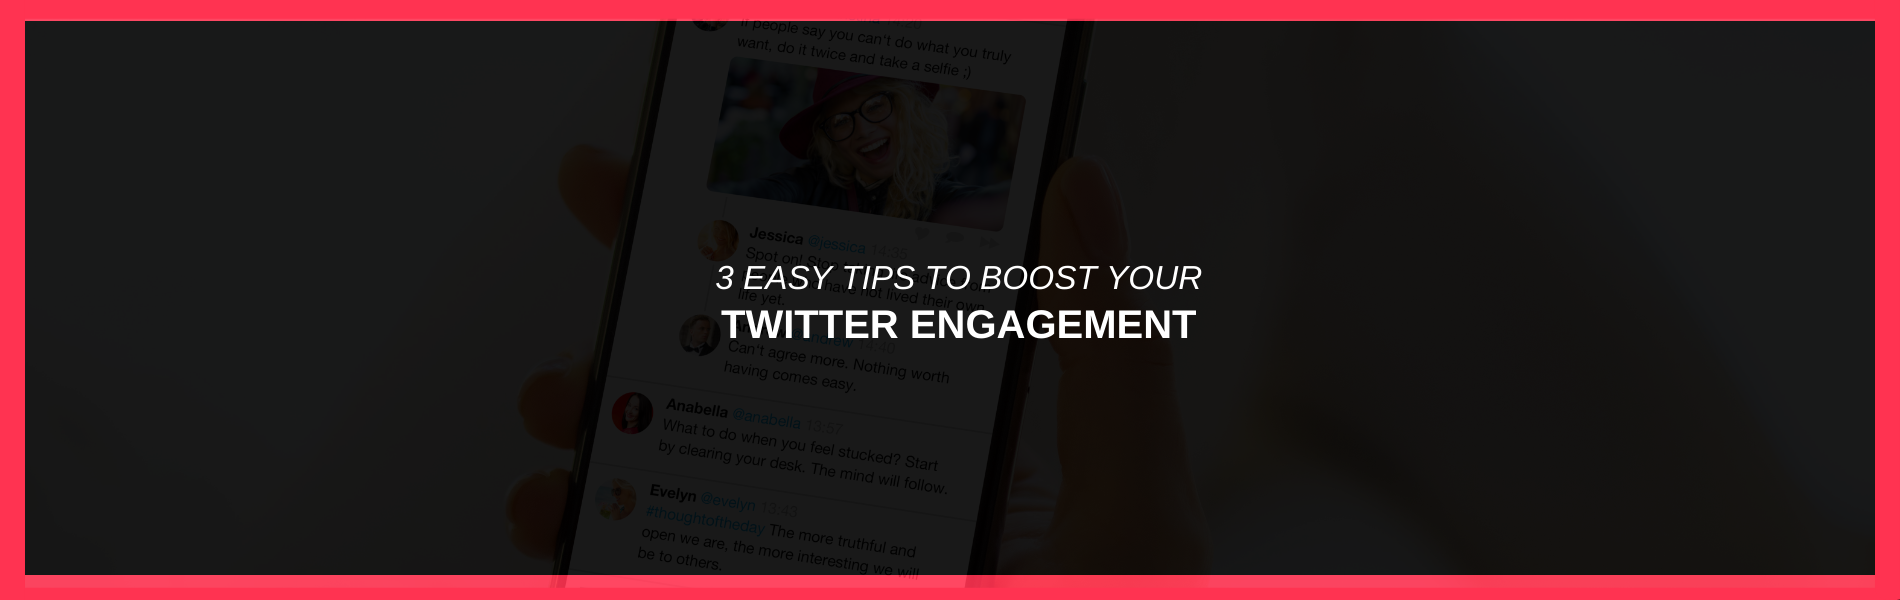 3 Easy Tips to Boost Your Twitter Engagement